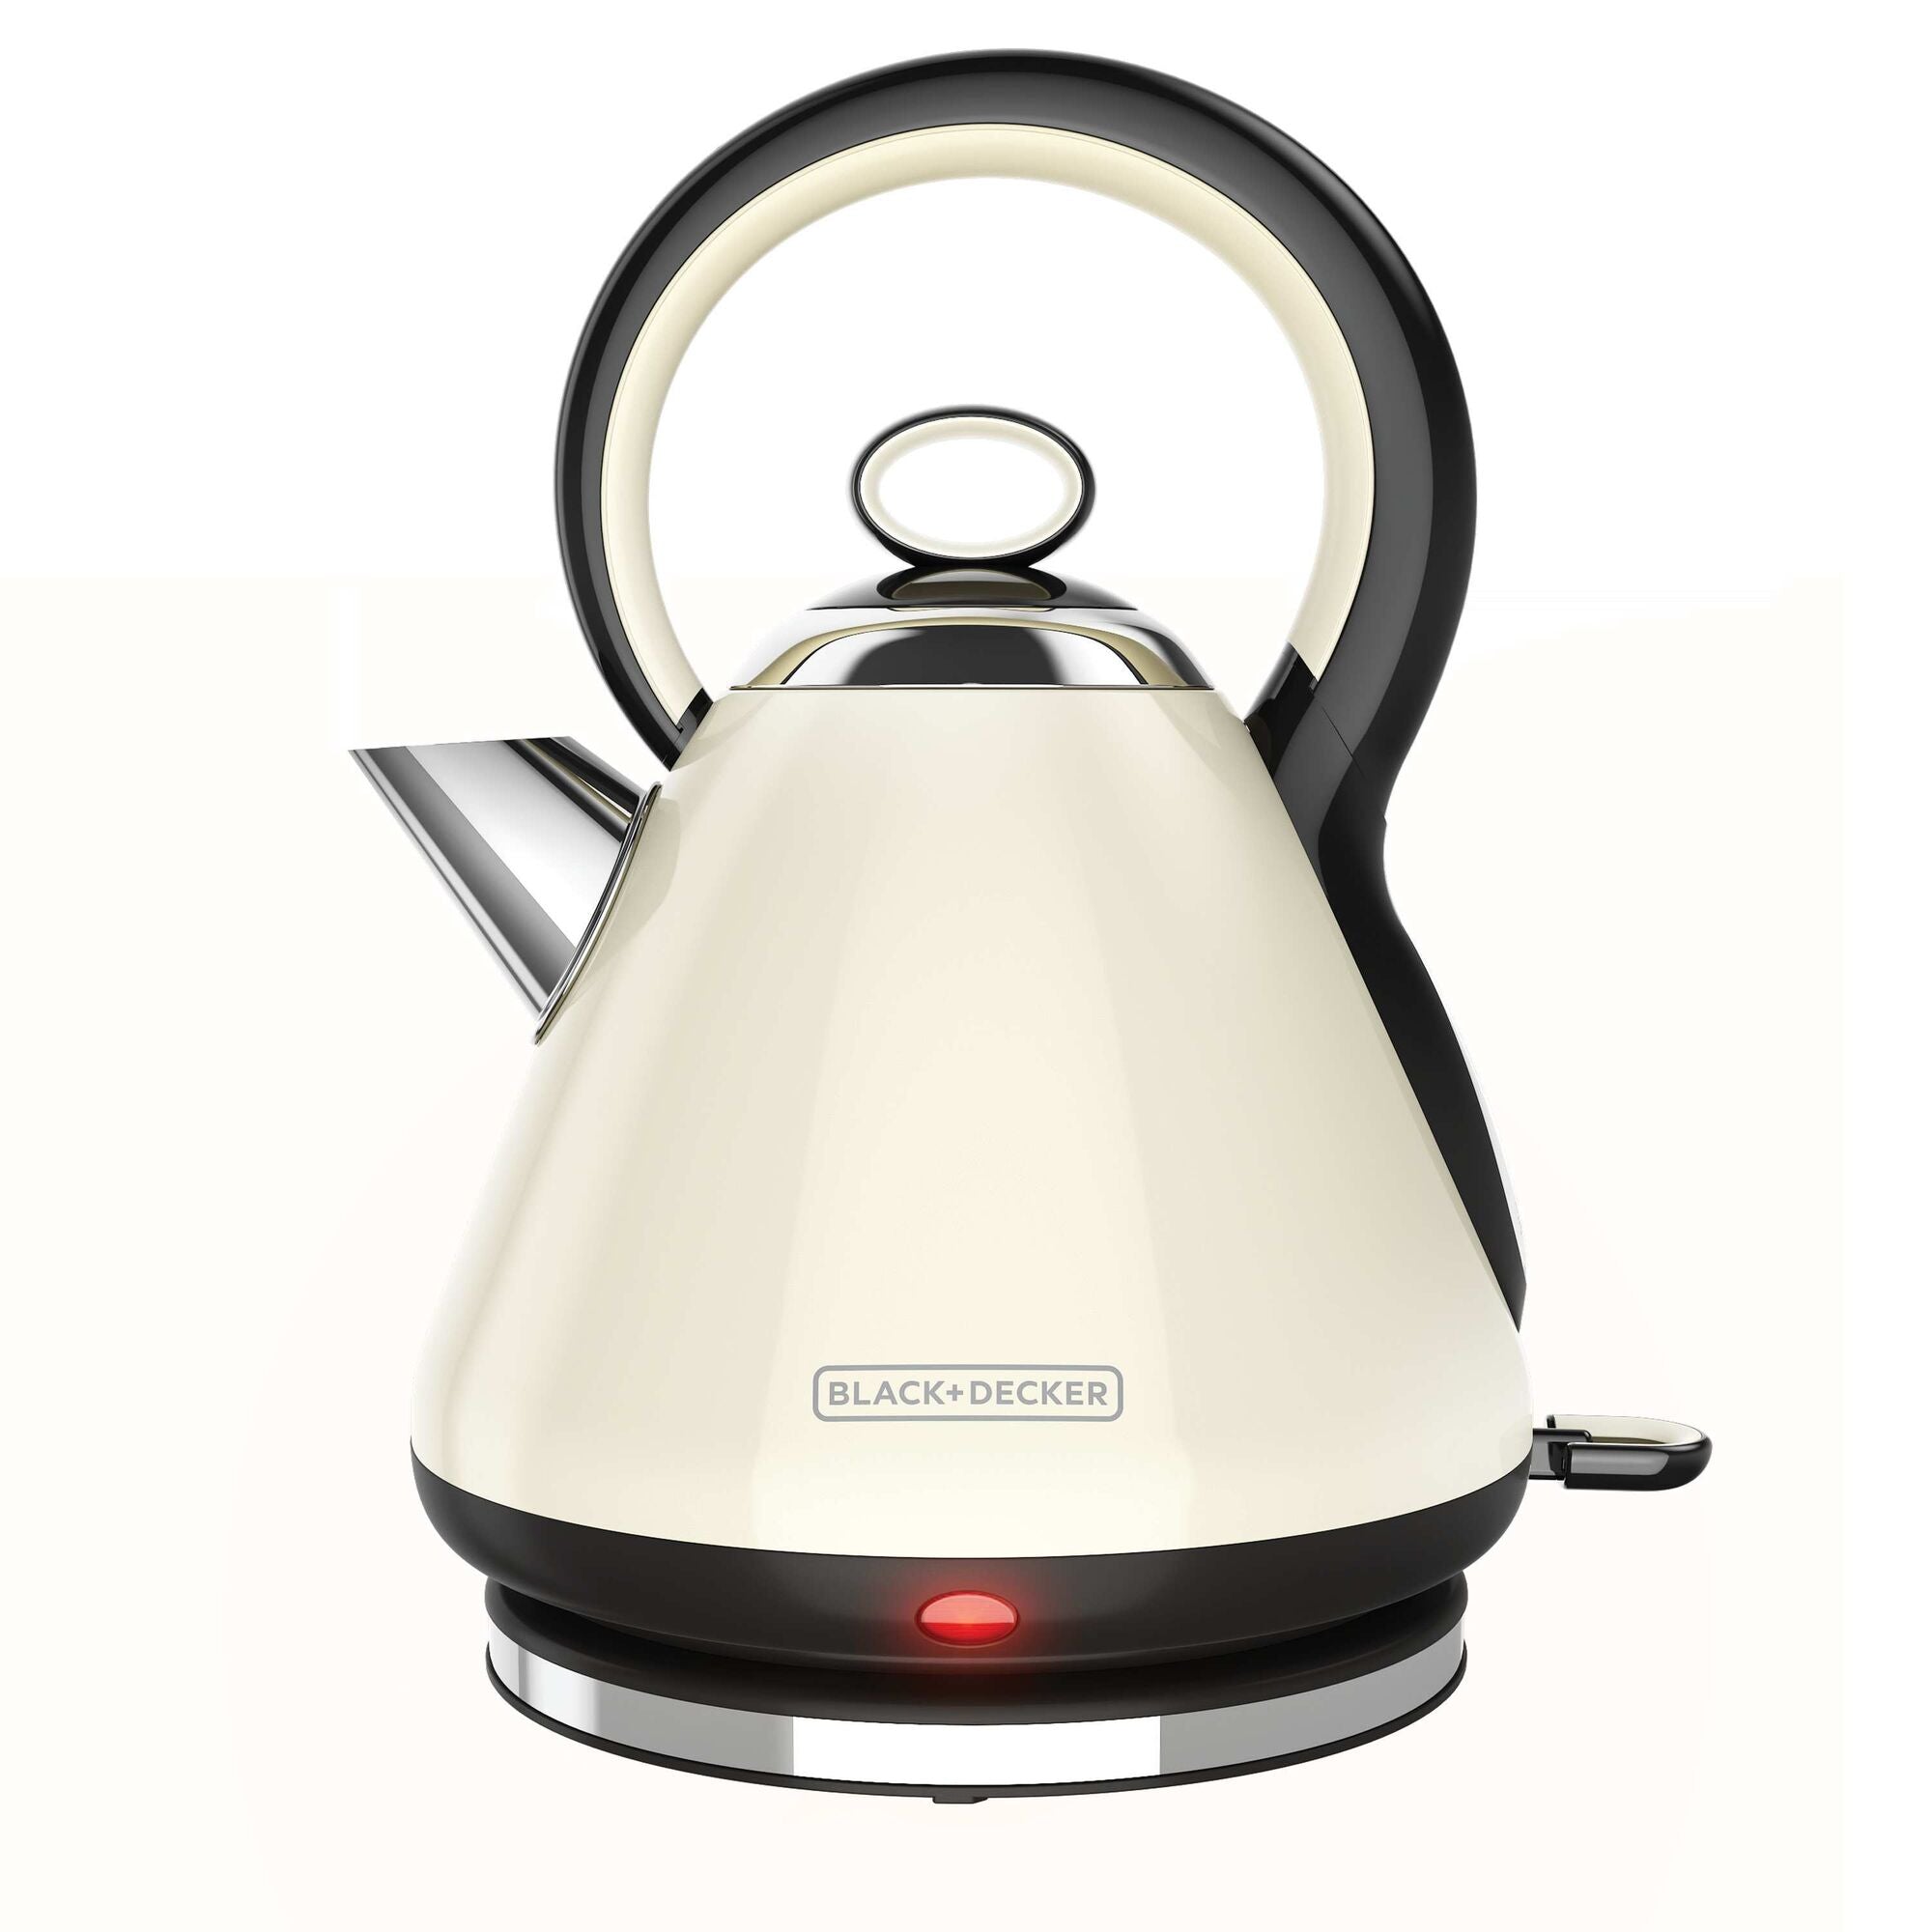 1.7 liter stainless steel electric cordless kettle.